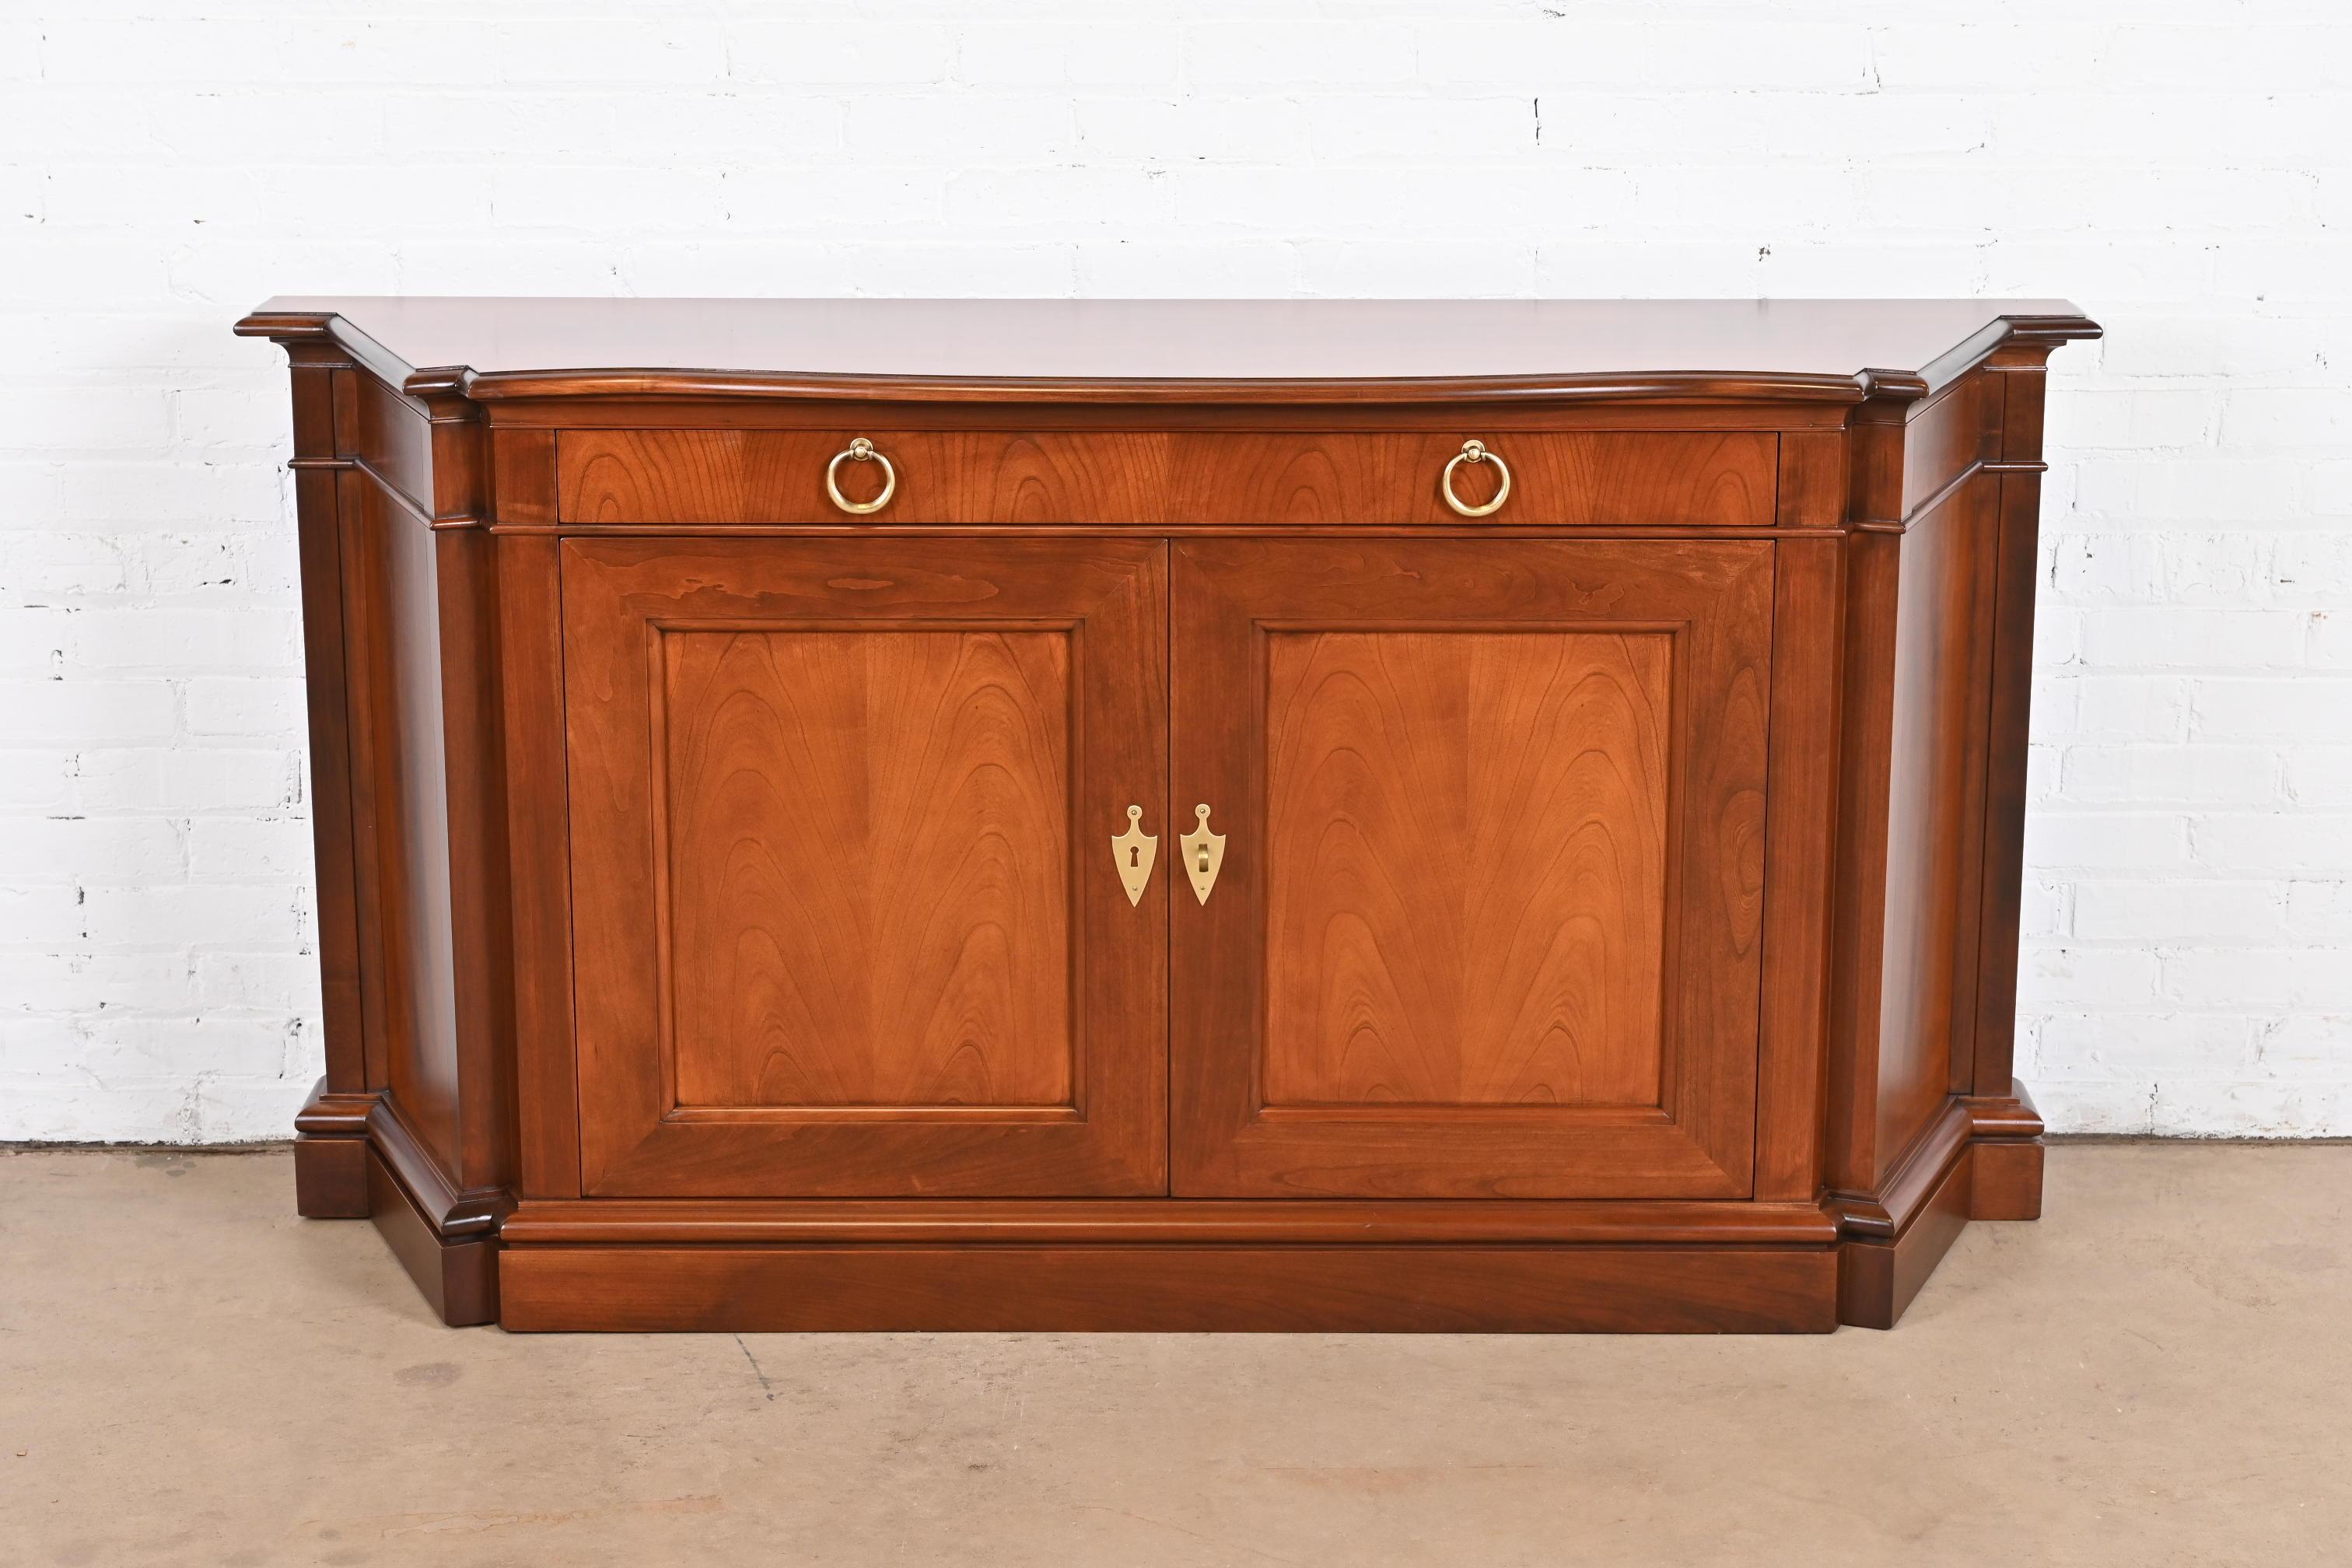 A gorgeous French Regency Louis XVI style sideboard, credenza, or bar cabinet

By Baker Furniture

USA, Circa 1960s

Carved solid cherry wood, with original brass hardware. Cabinet locks, and key is included.

Measures: 65.5